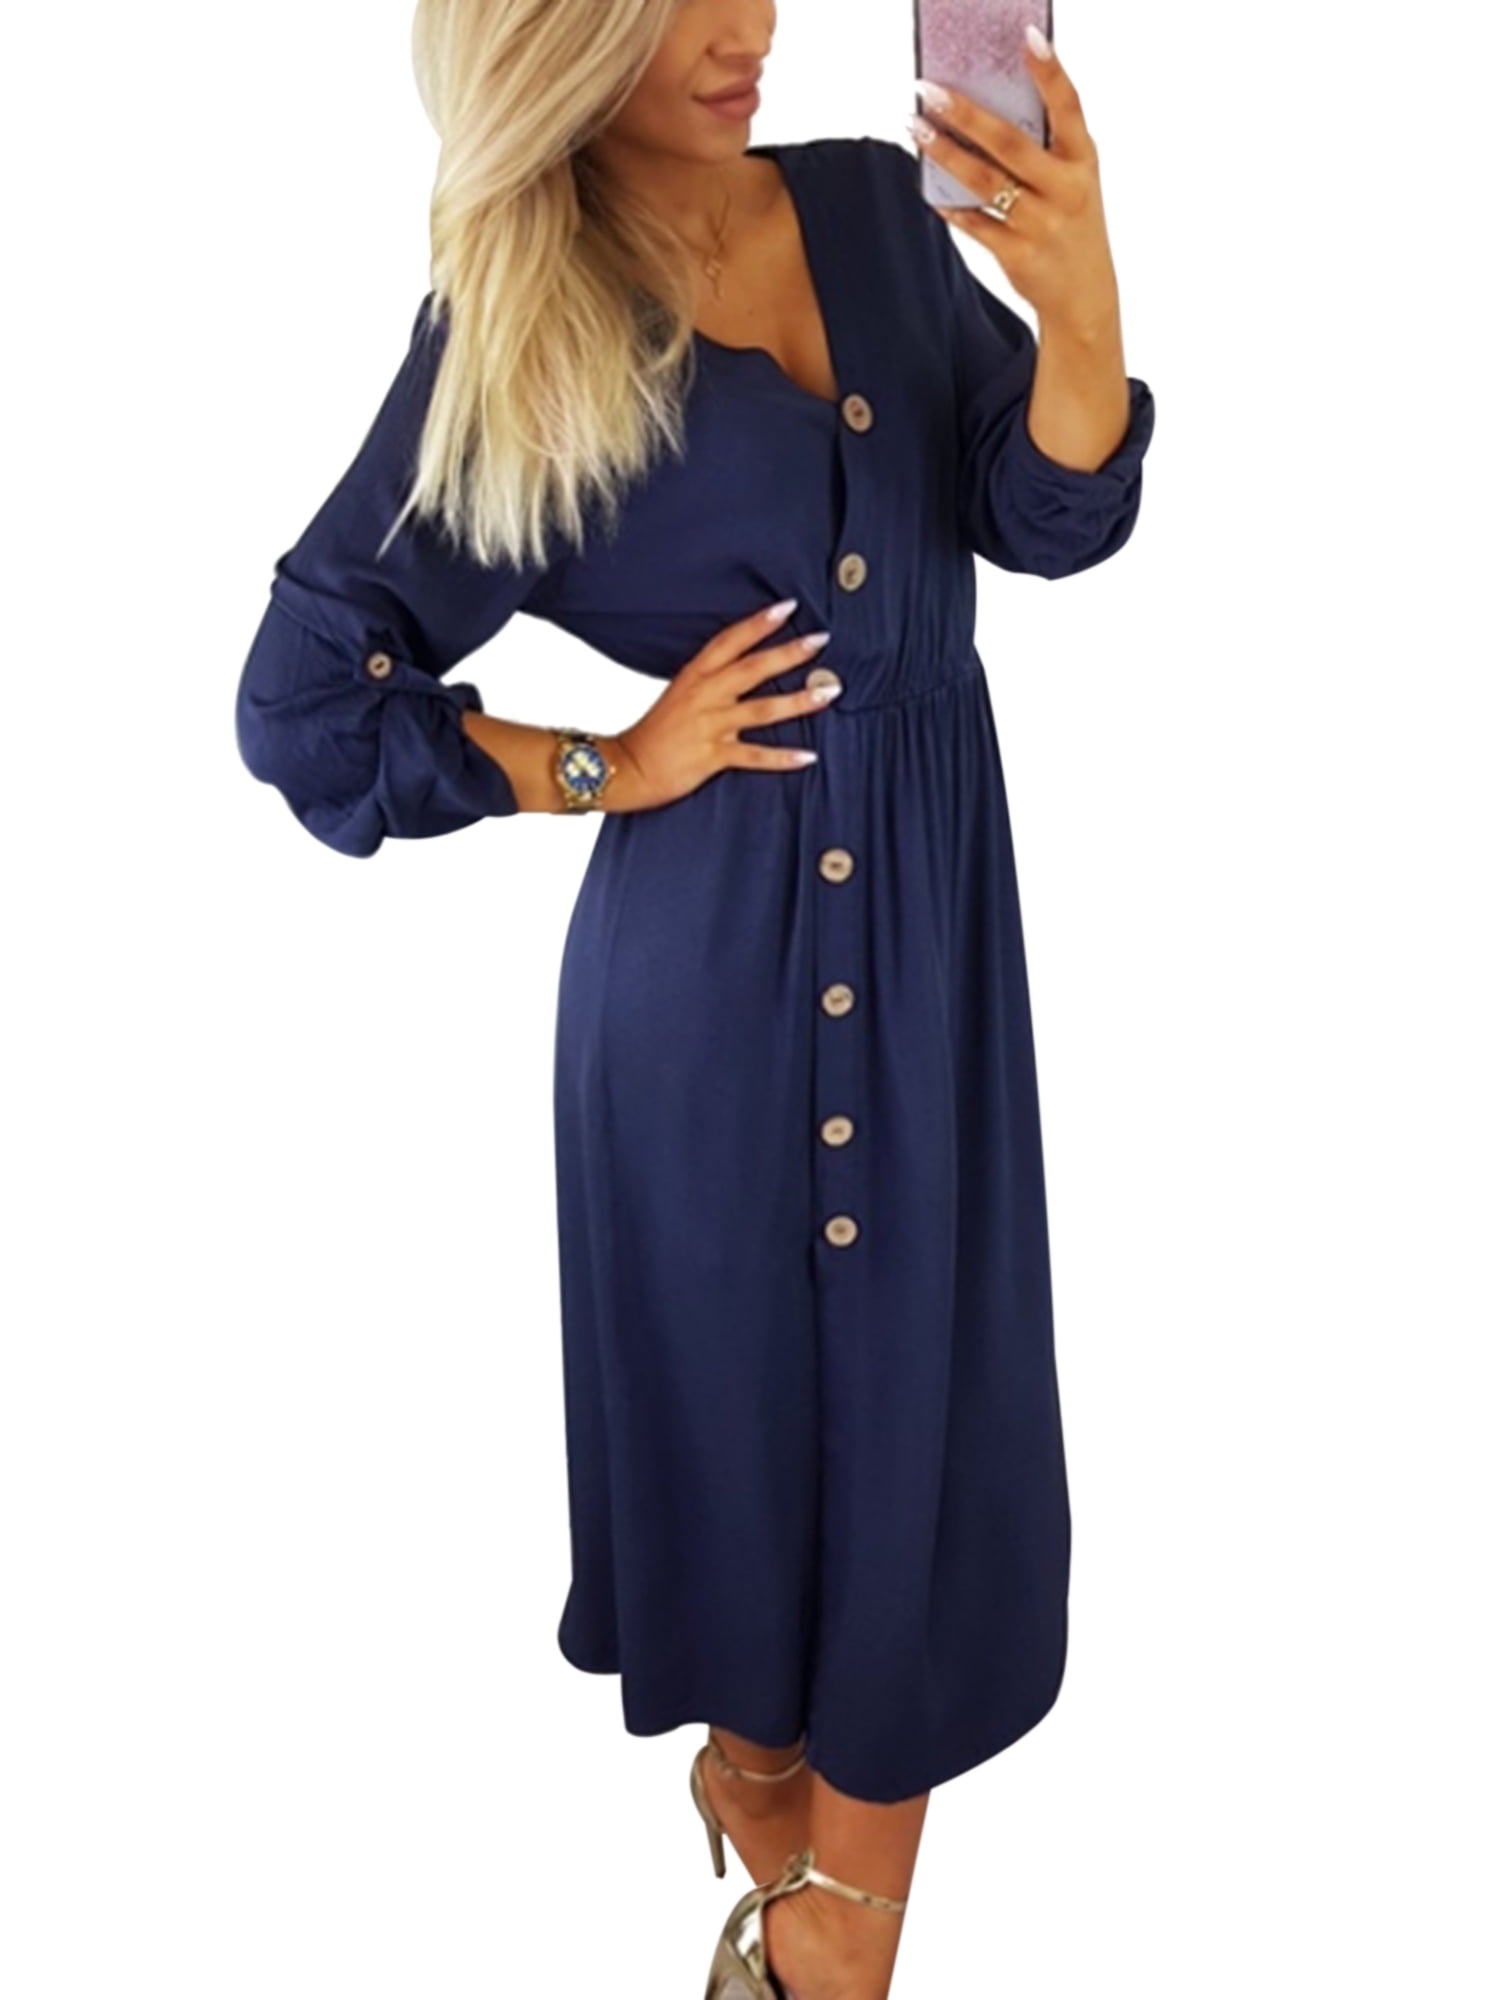 O-Neck Belted Party Lace Dress Plus Size Half Sleeve Long Maxi Dress,Navy Blue,8XL